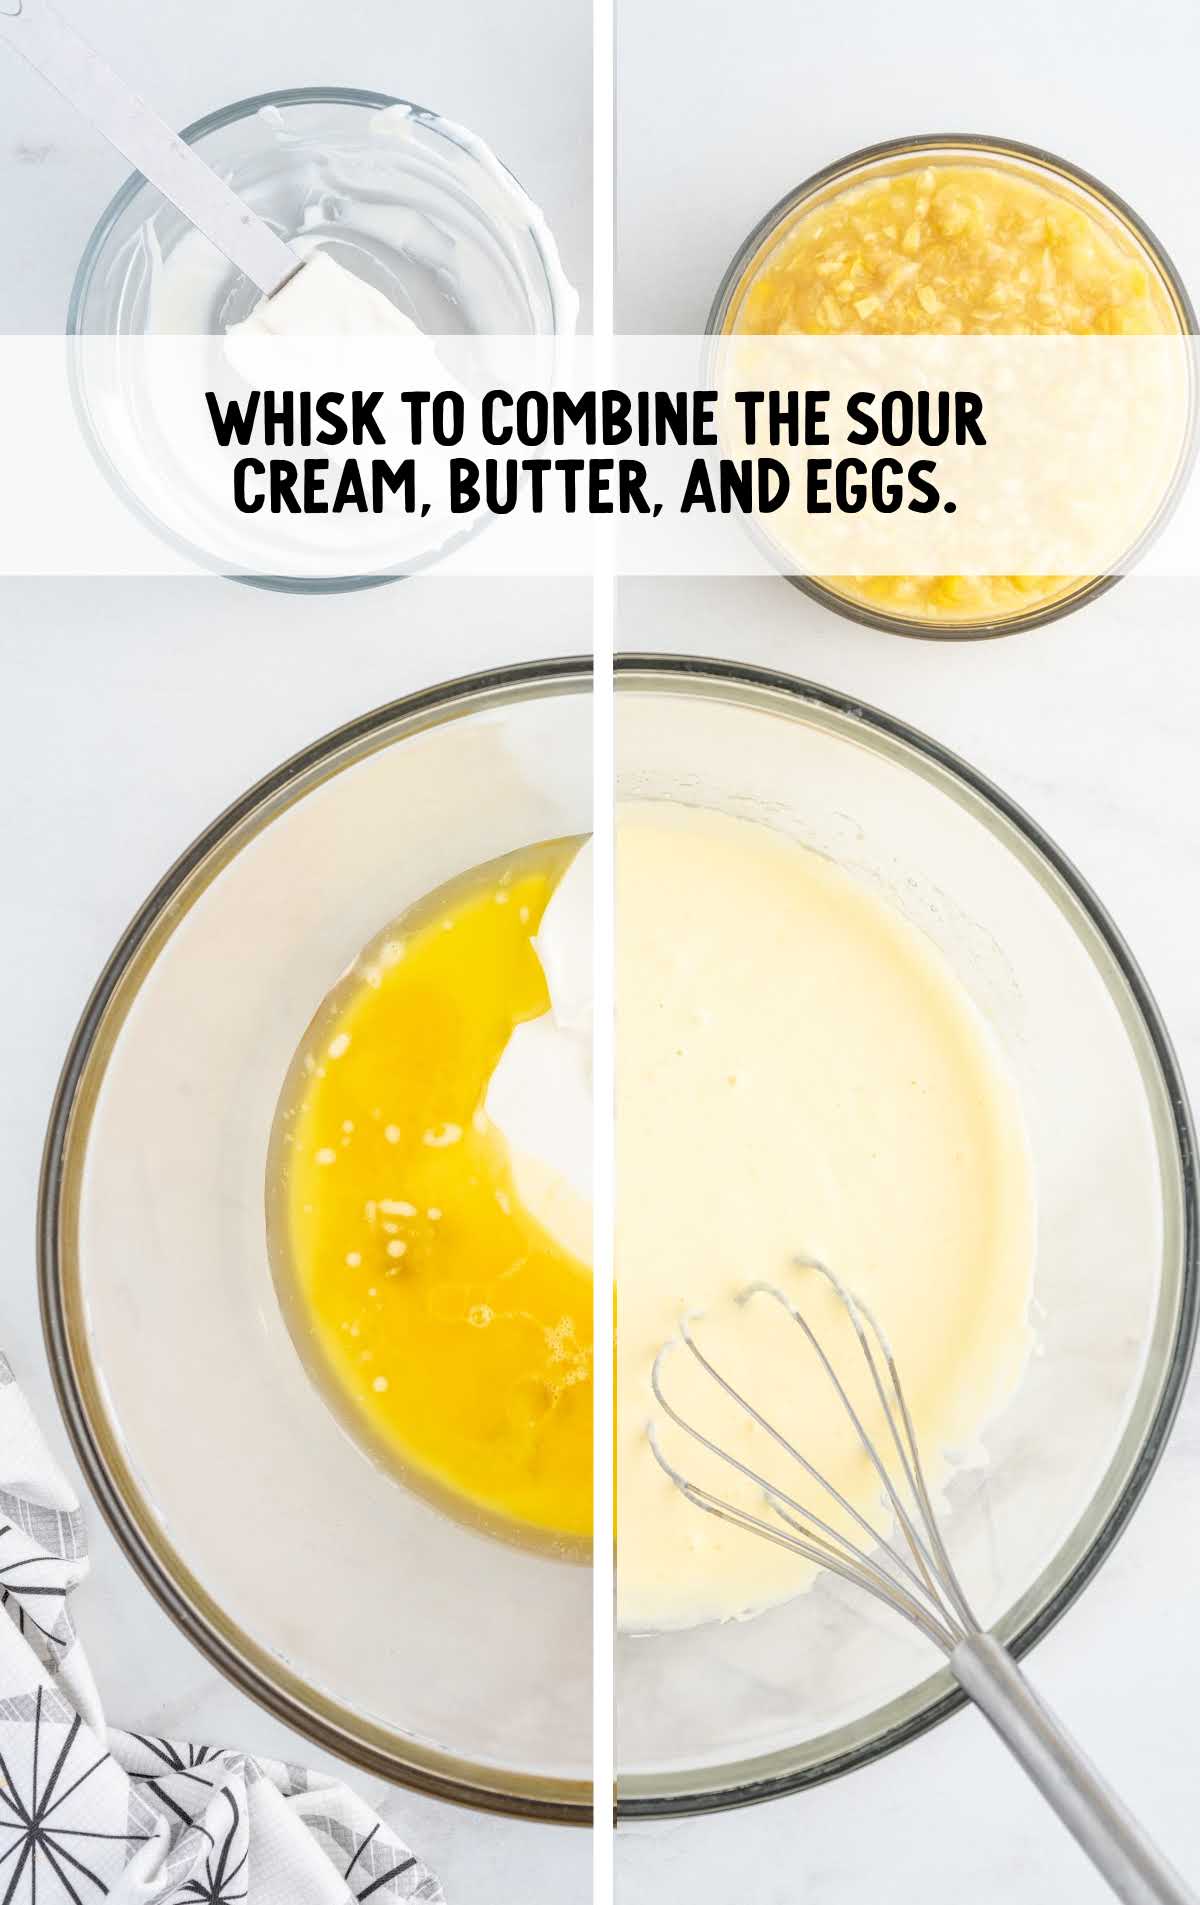 sour cream, butter, and eggs whisked in a bowl